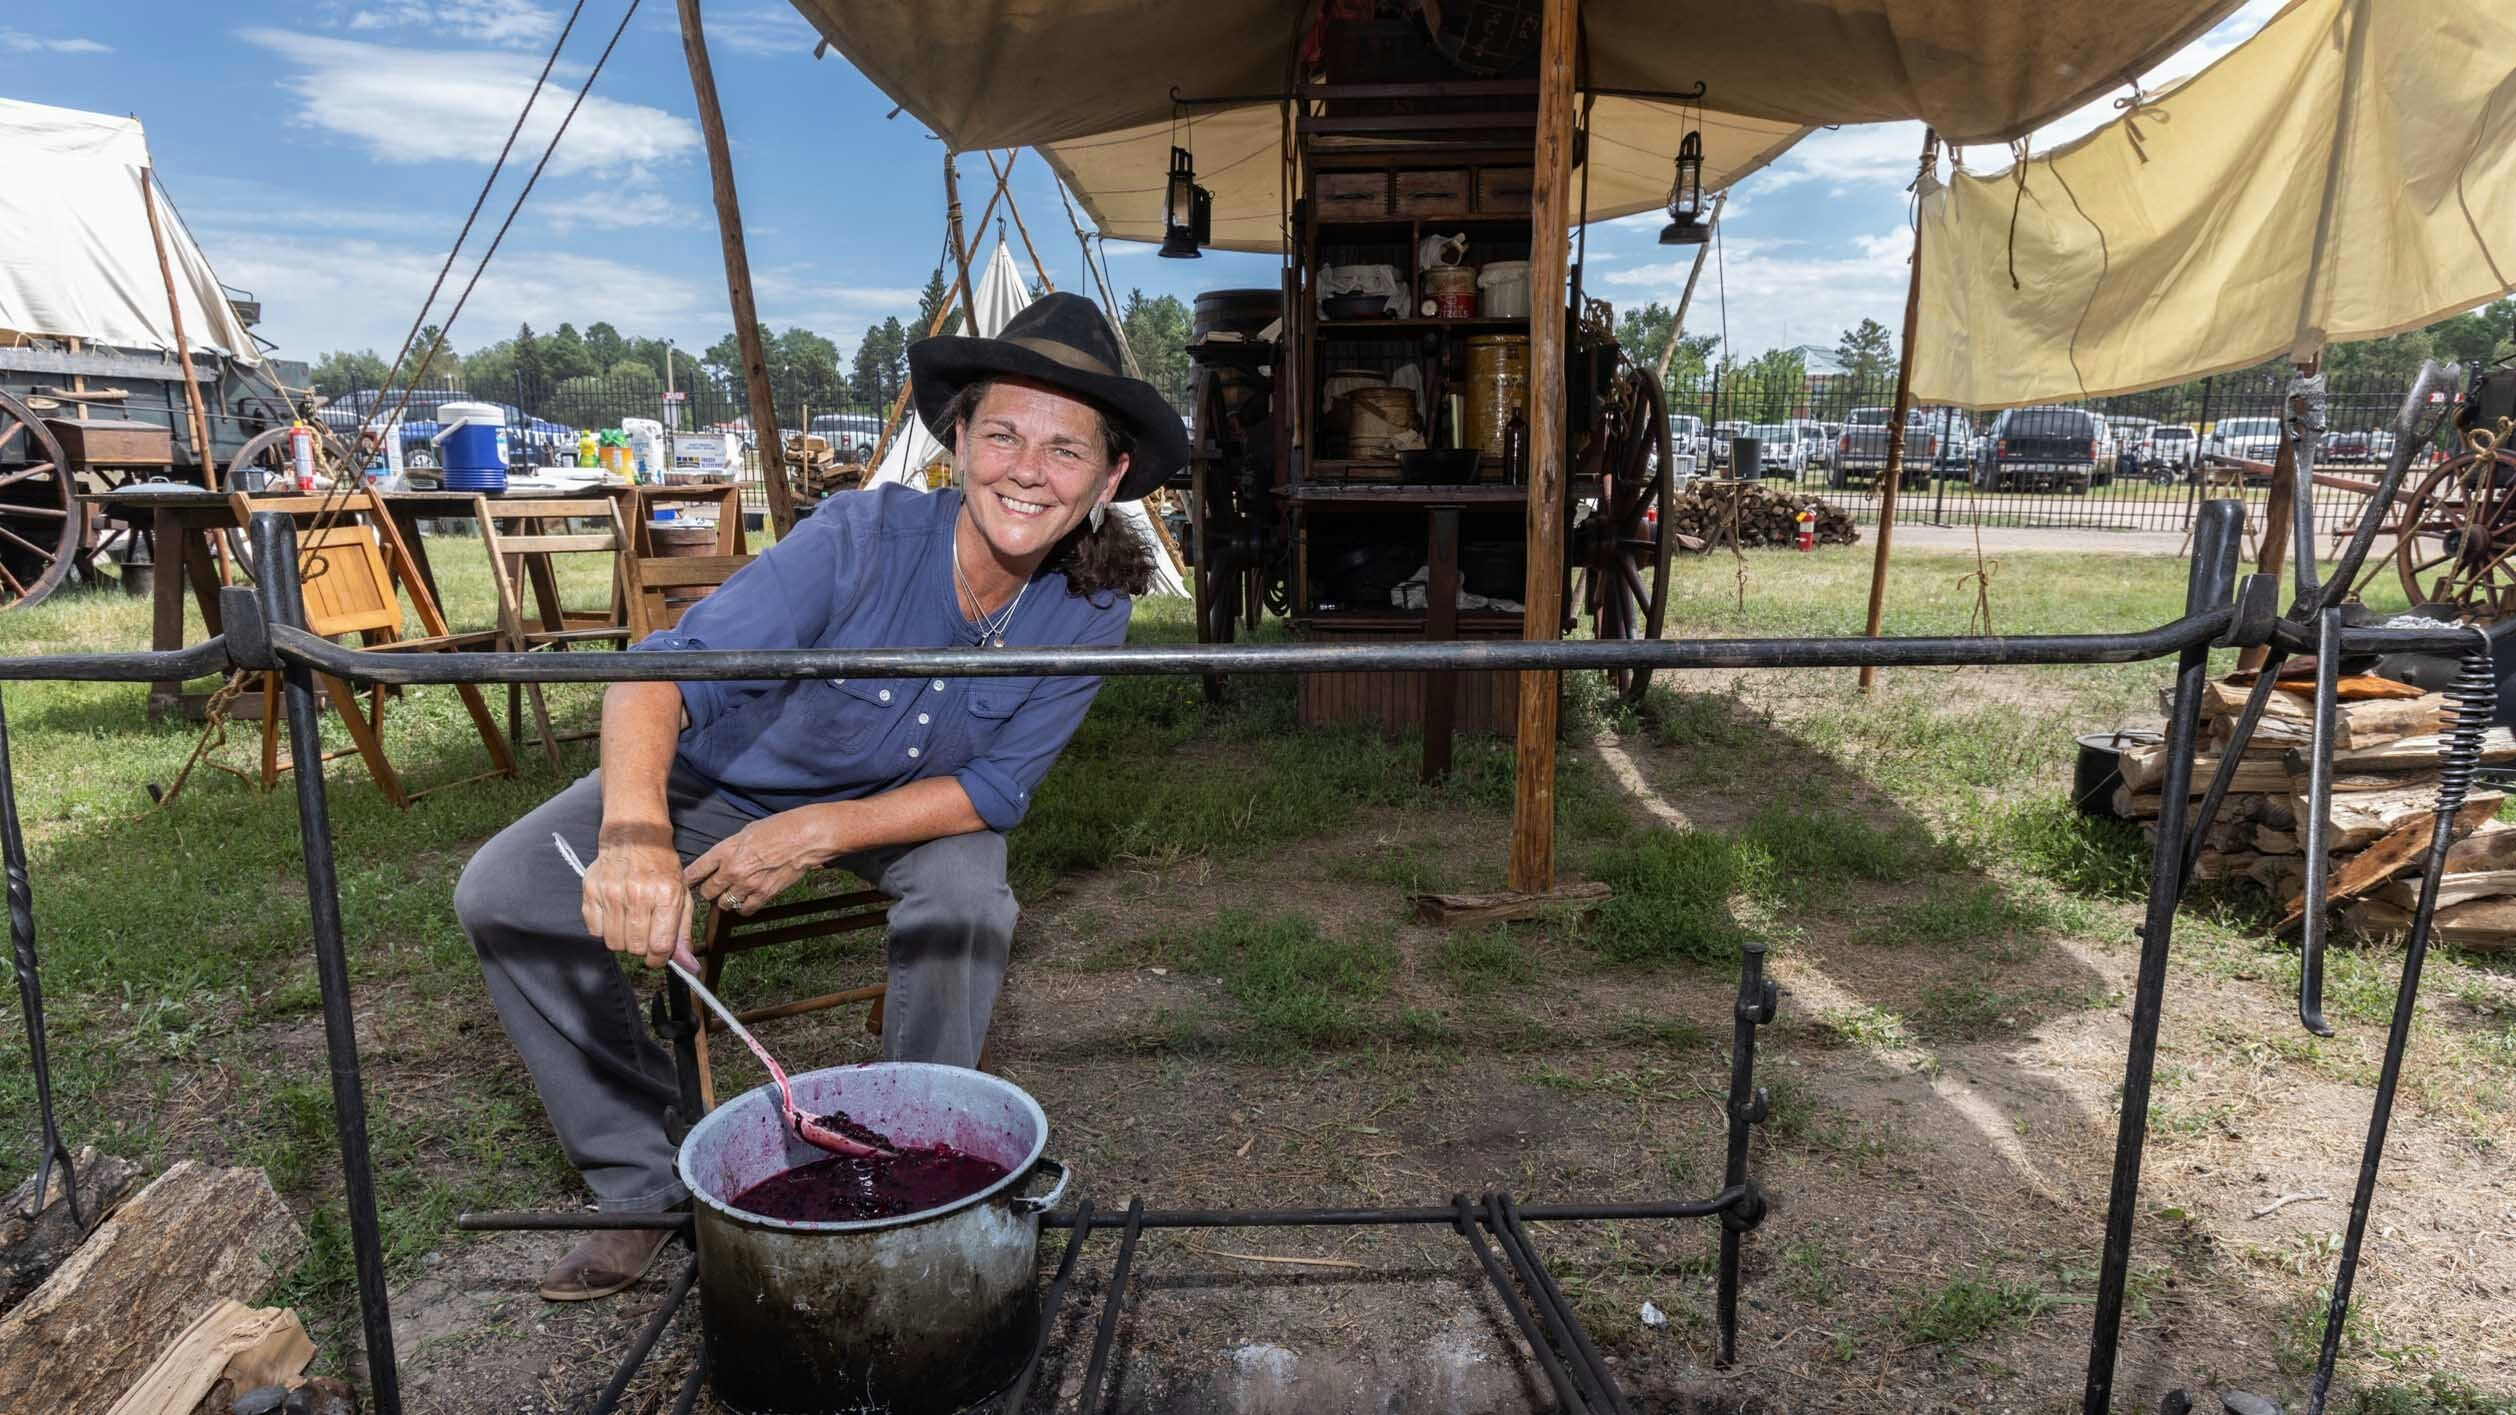 Susan Patrick from Watertown, SD cooks blueberries for her Blueberry Cobbler at the DT Wagon during the VIP Chuckwagon Dinner at Cheyenne Frontier Days on July 26, 2023.